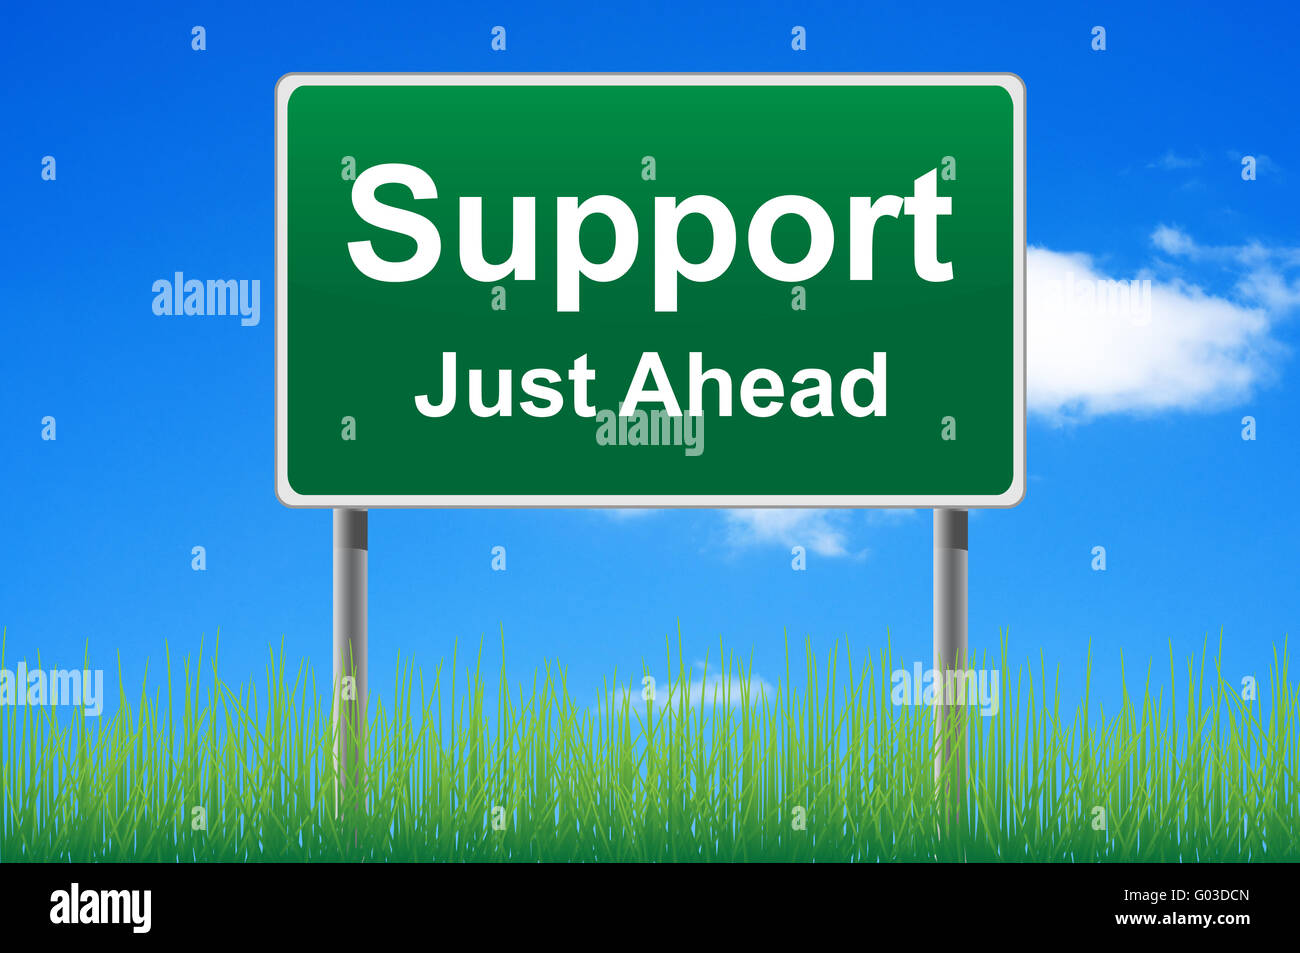 Support road sign on sky background. Bottom grass. Stock Photo